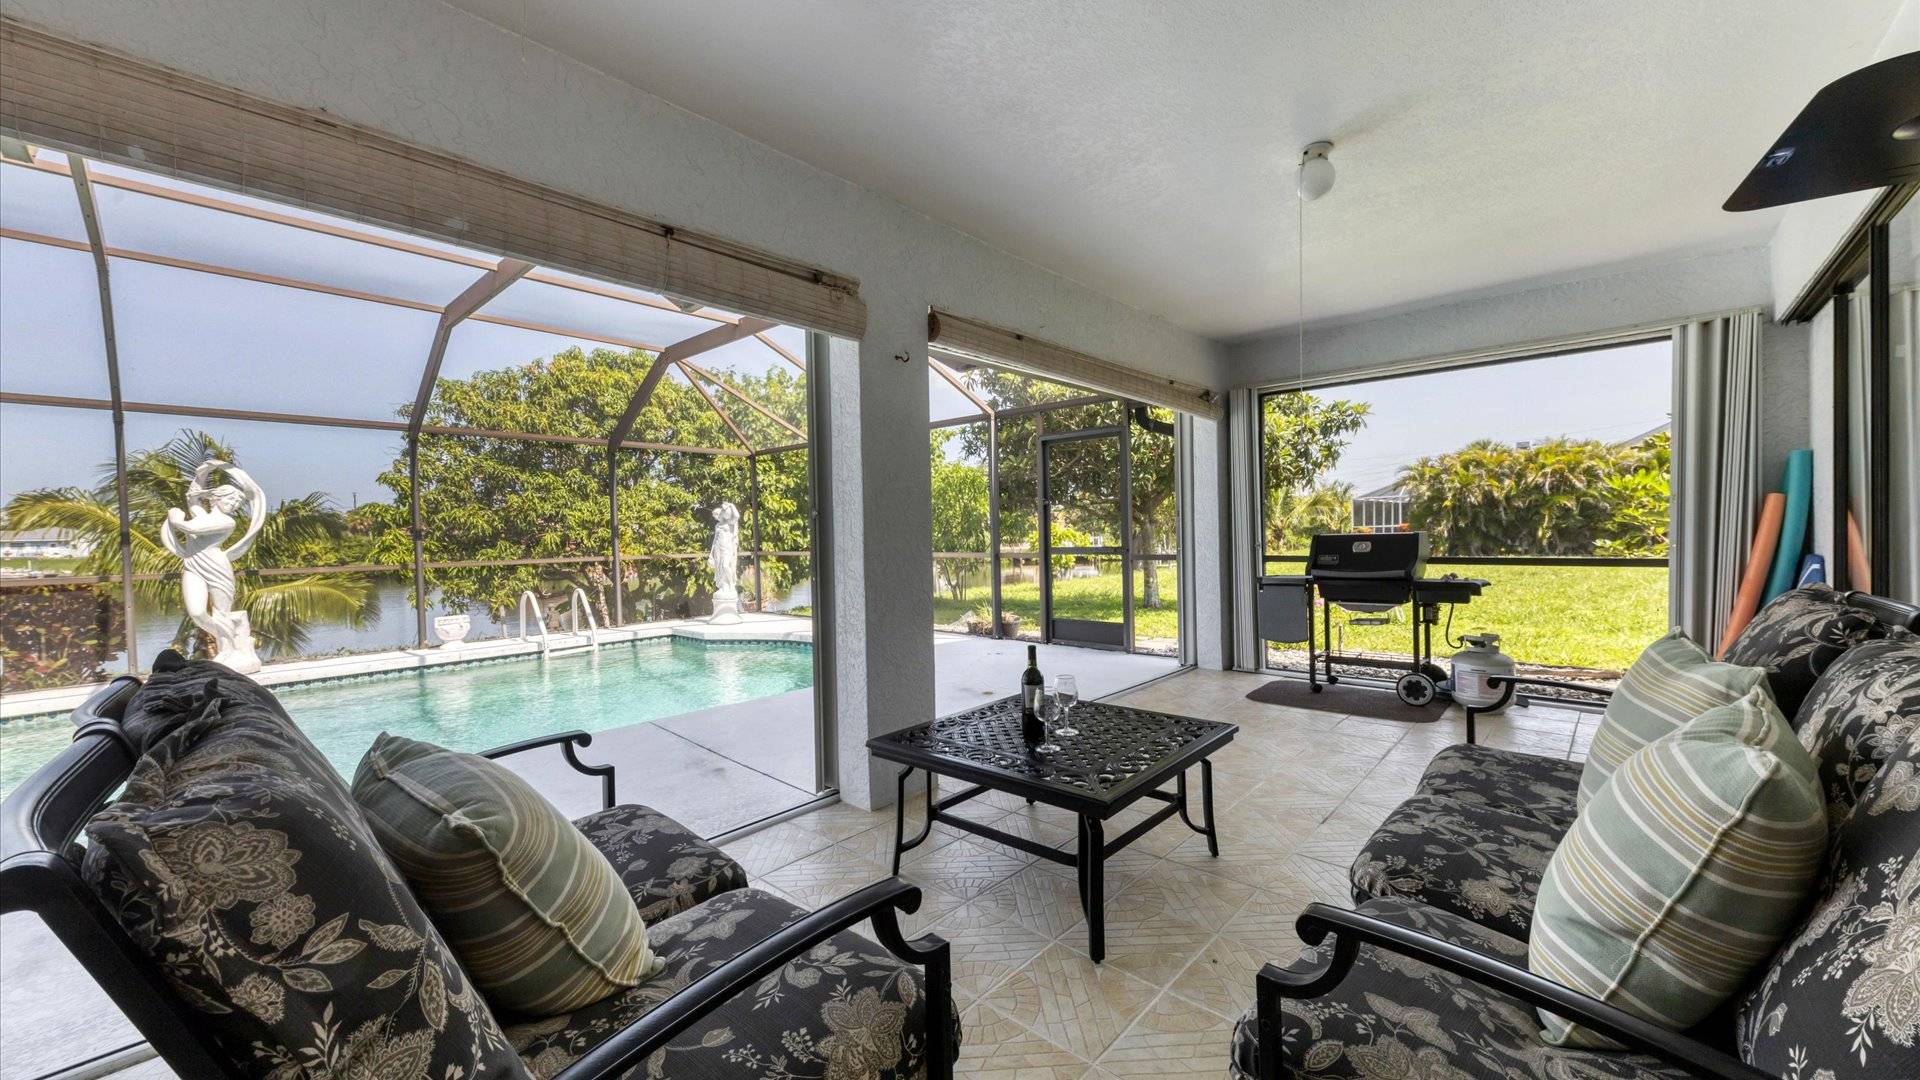 Lovely lanai seating area for the best of Florida outdoor living